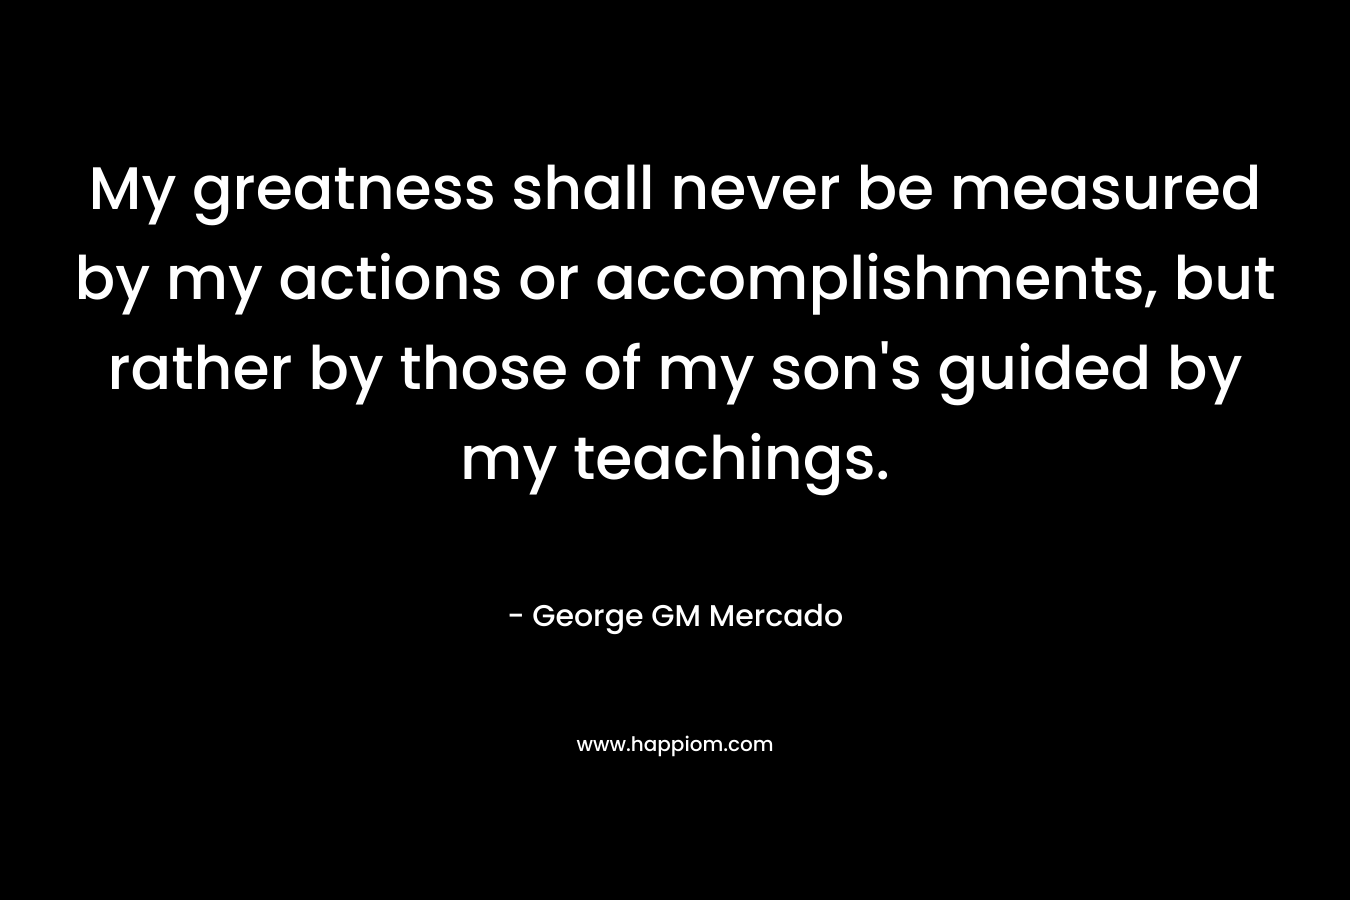 My greatness shall never be measured by my actions or accomplishments, but rather by those of my son’s guided by my teachings. – George GM Mercado